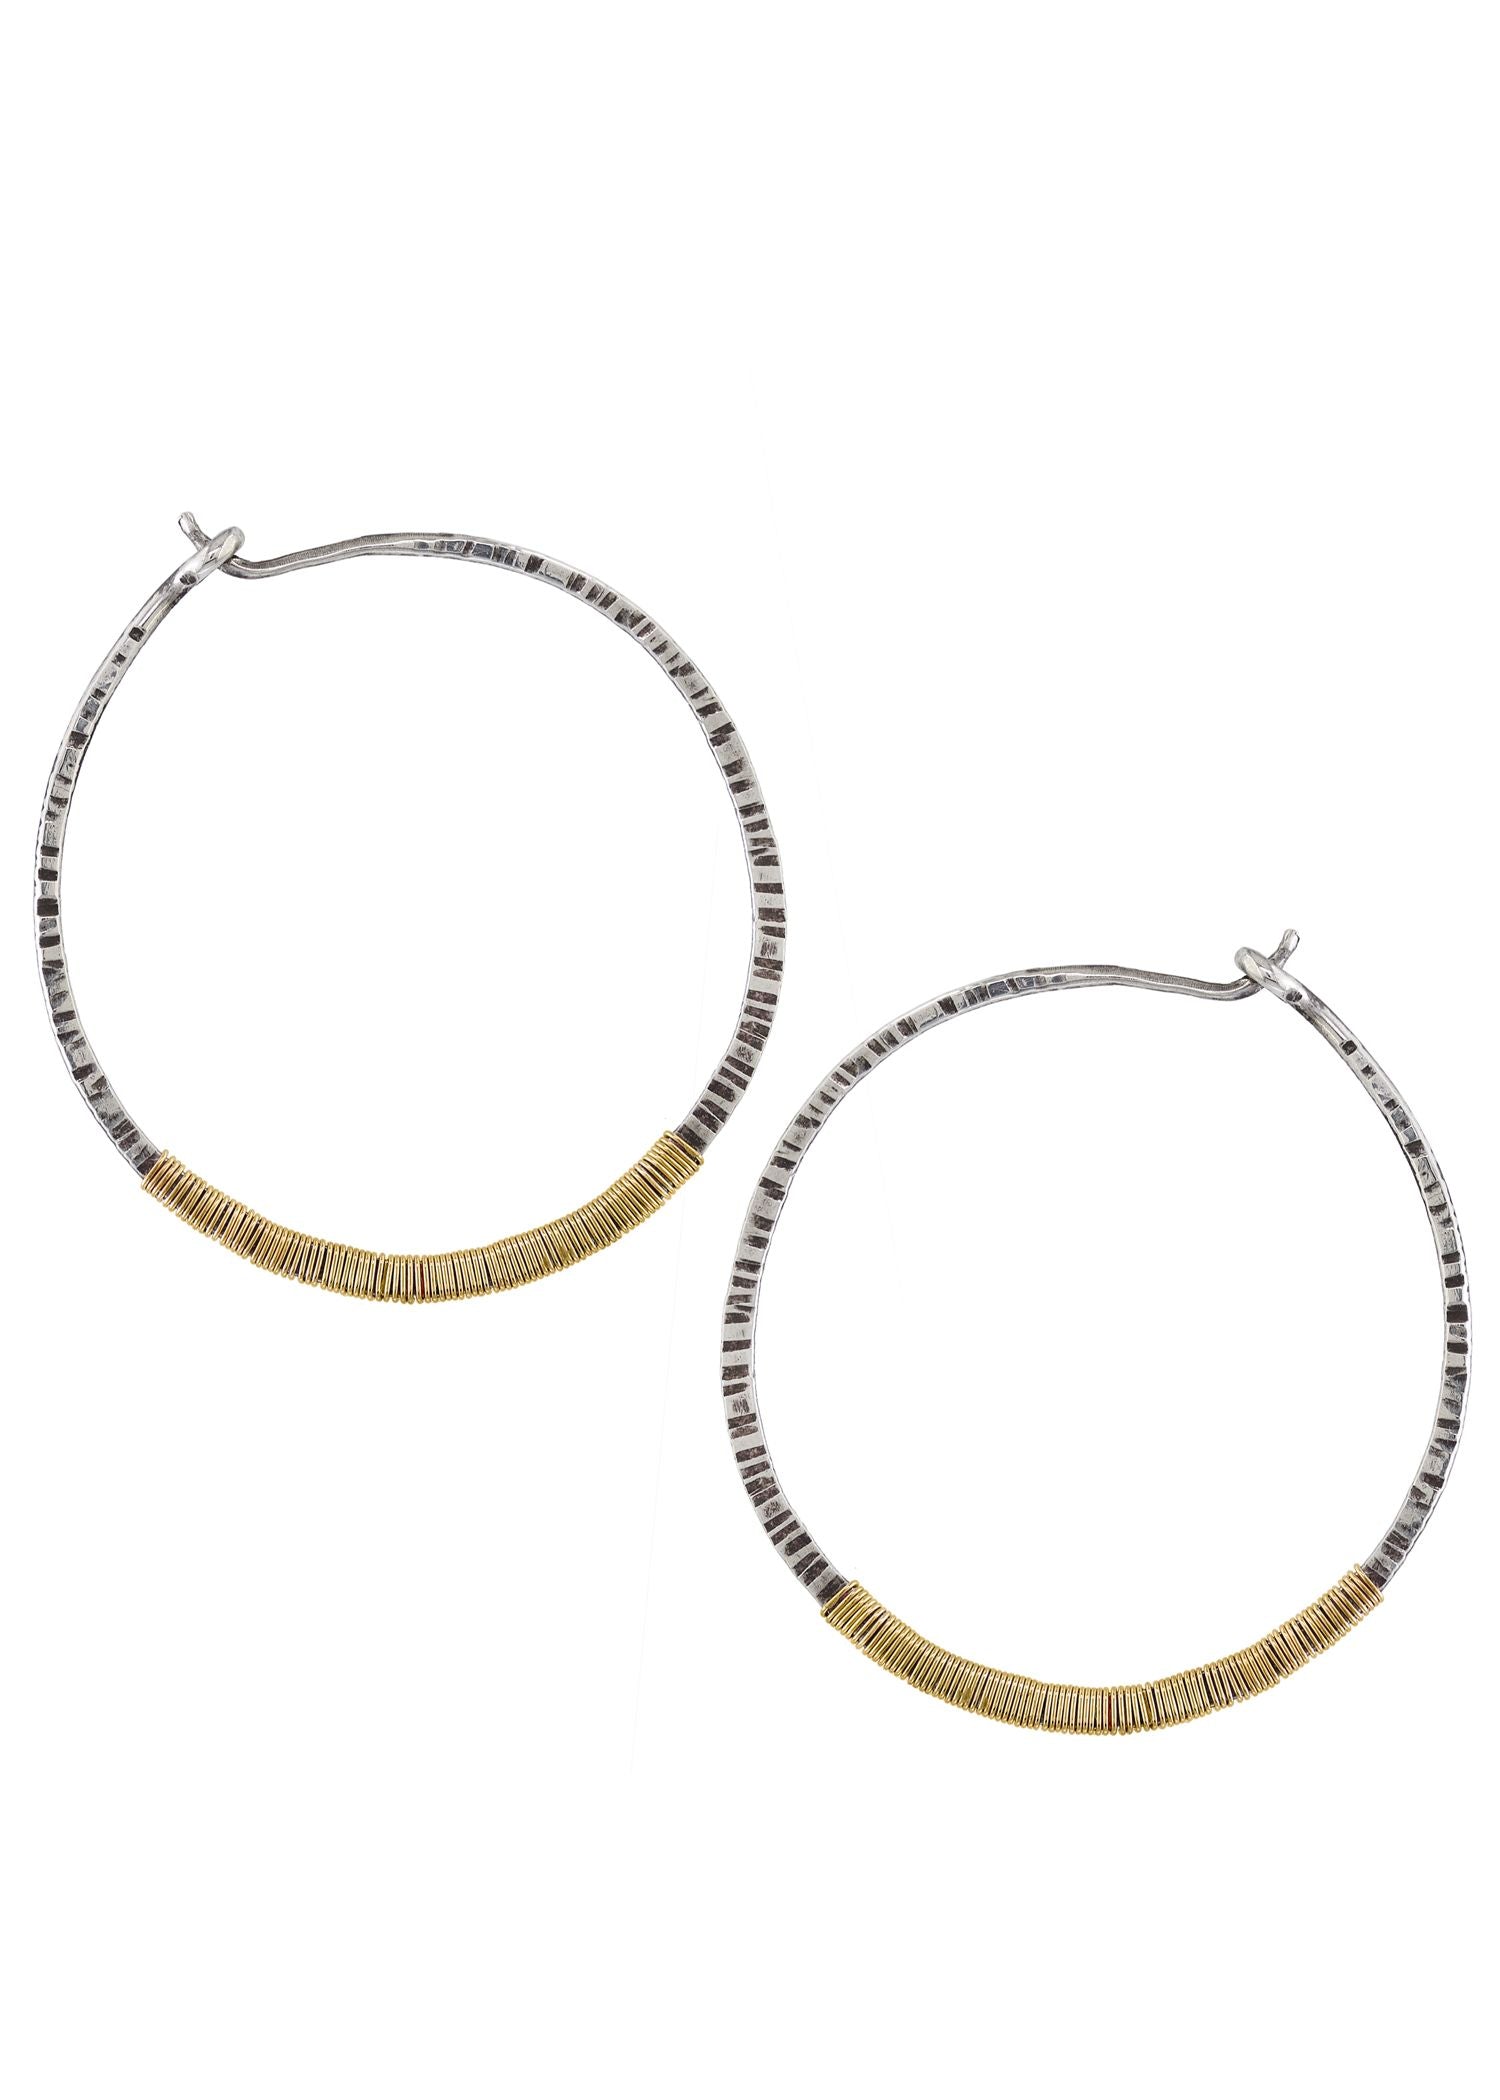 14k gold fill Sterling silver Mixed metal Earrings measure 1-1/2" in length and 1-1/2 in width Handmade in our Los Angeles studio